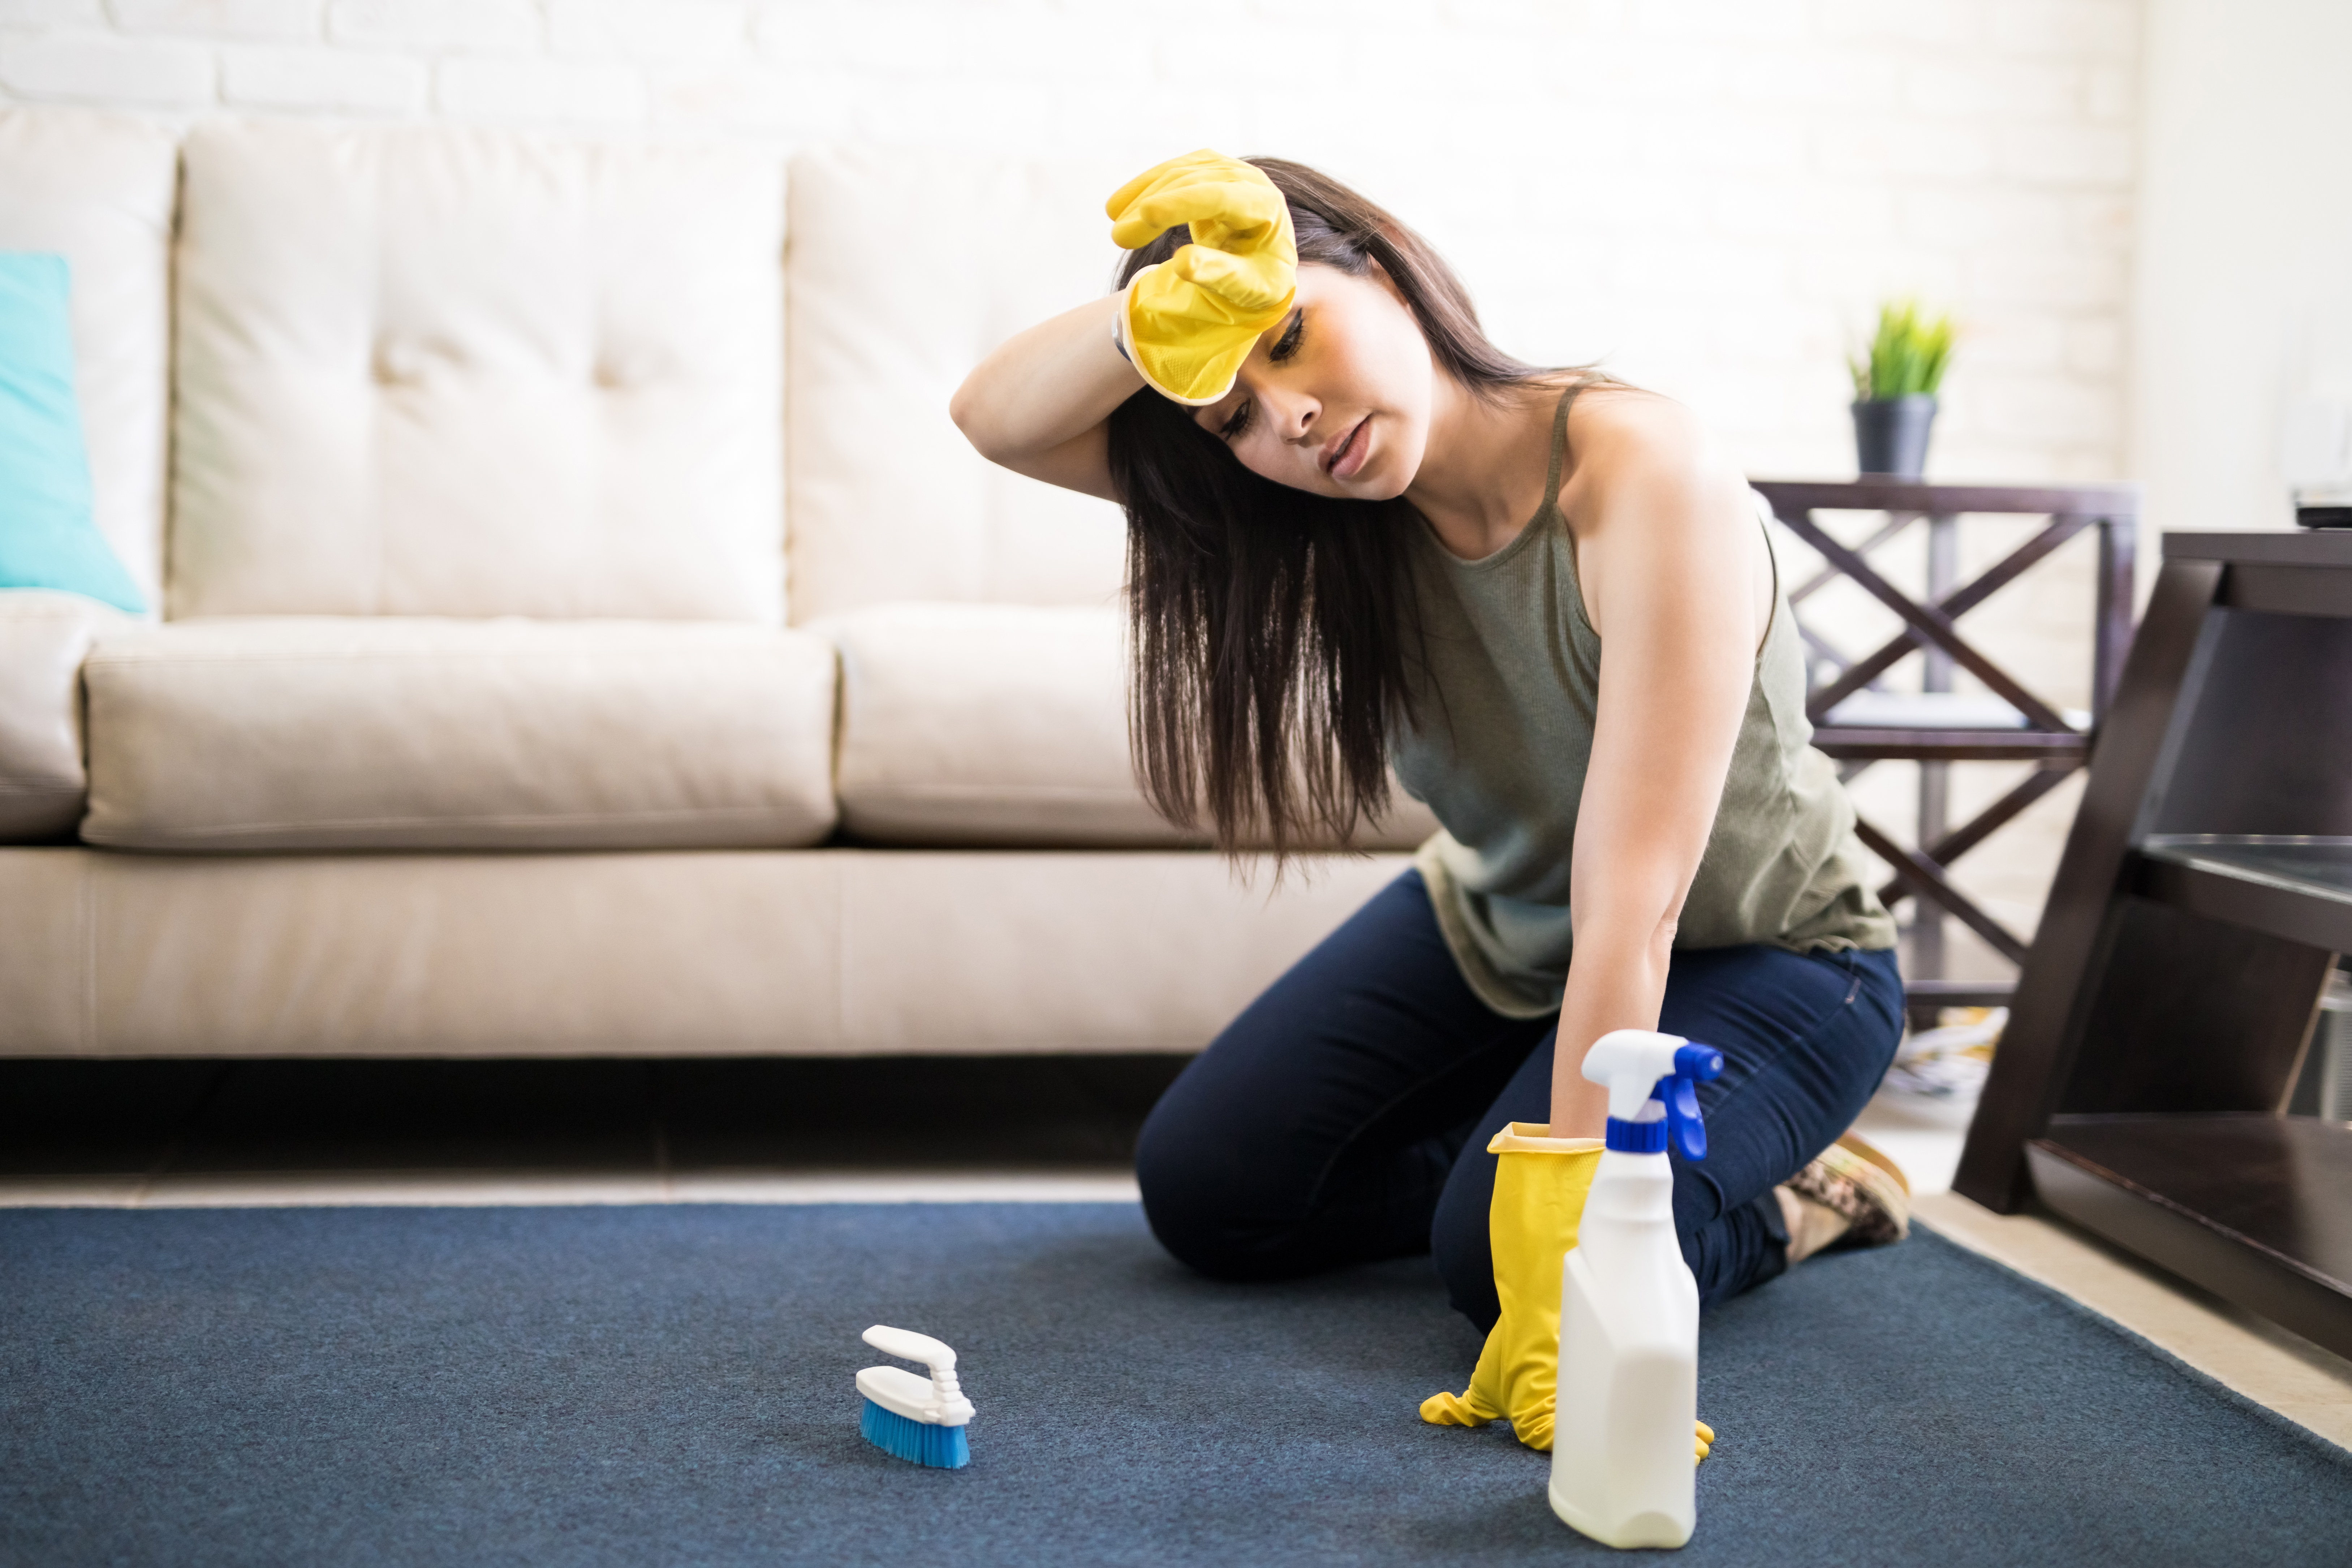 An exhausted woman cleaning a carpet | Source: Getty Images